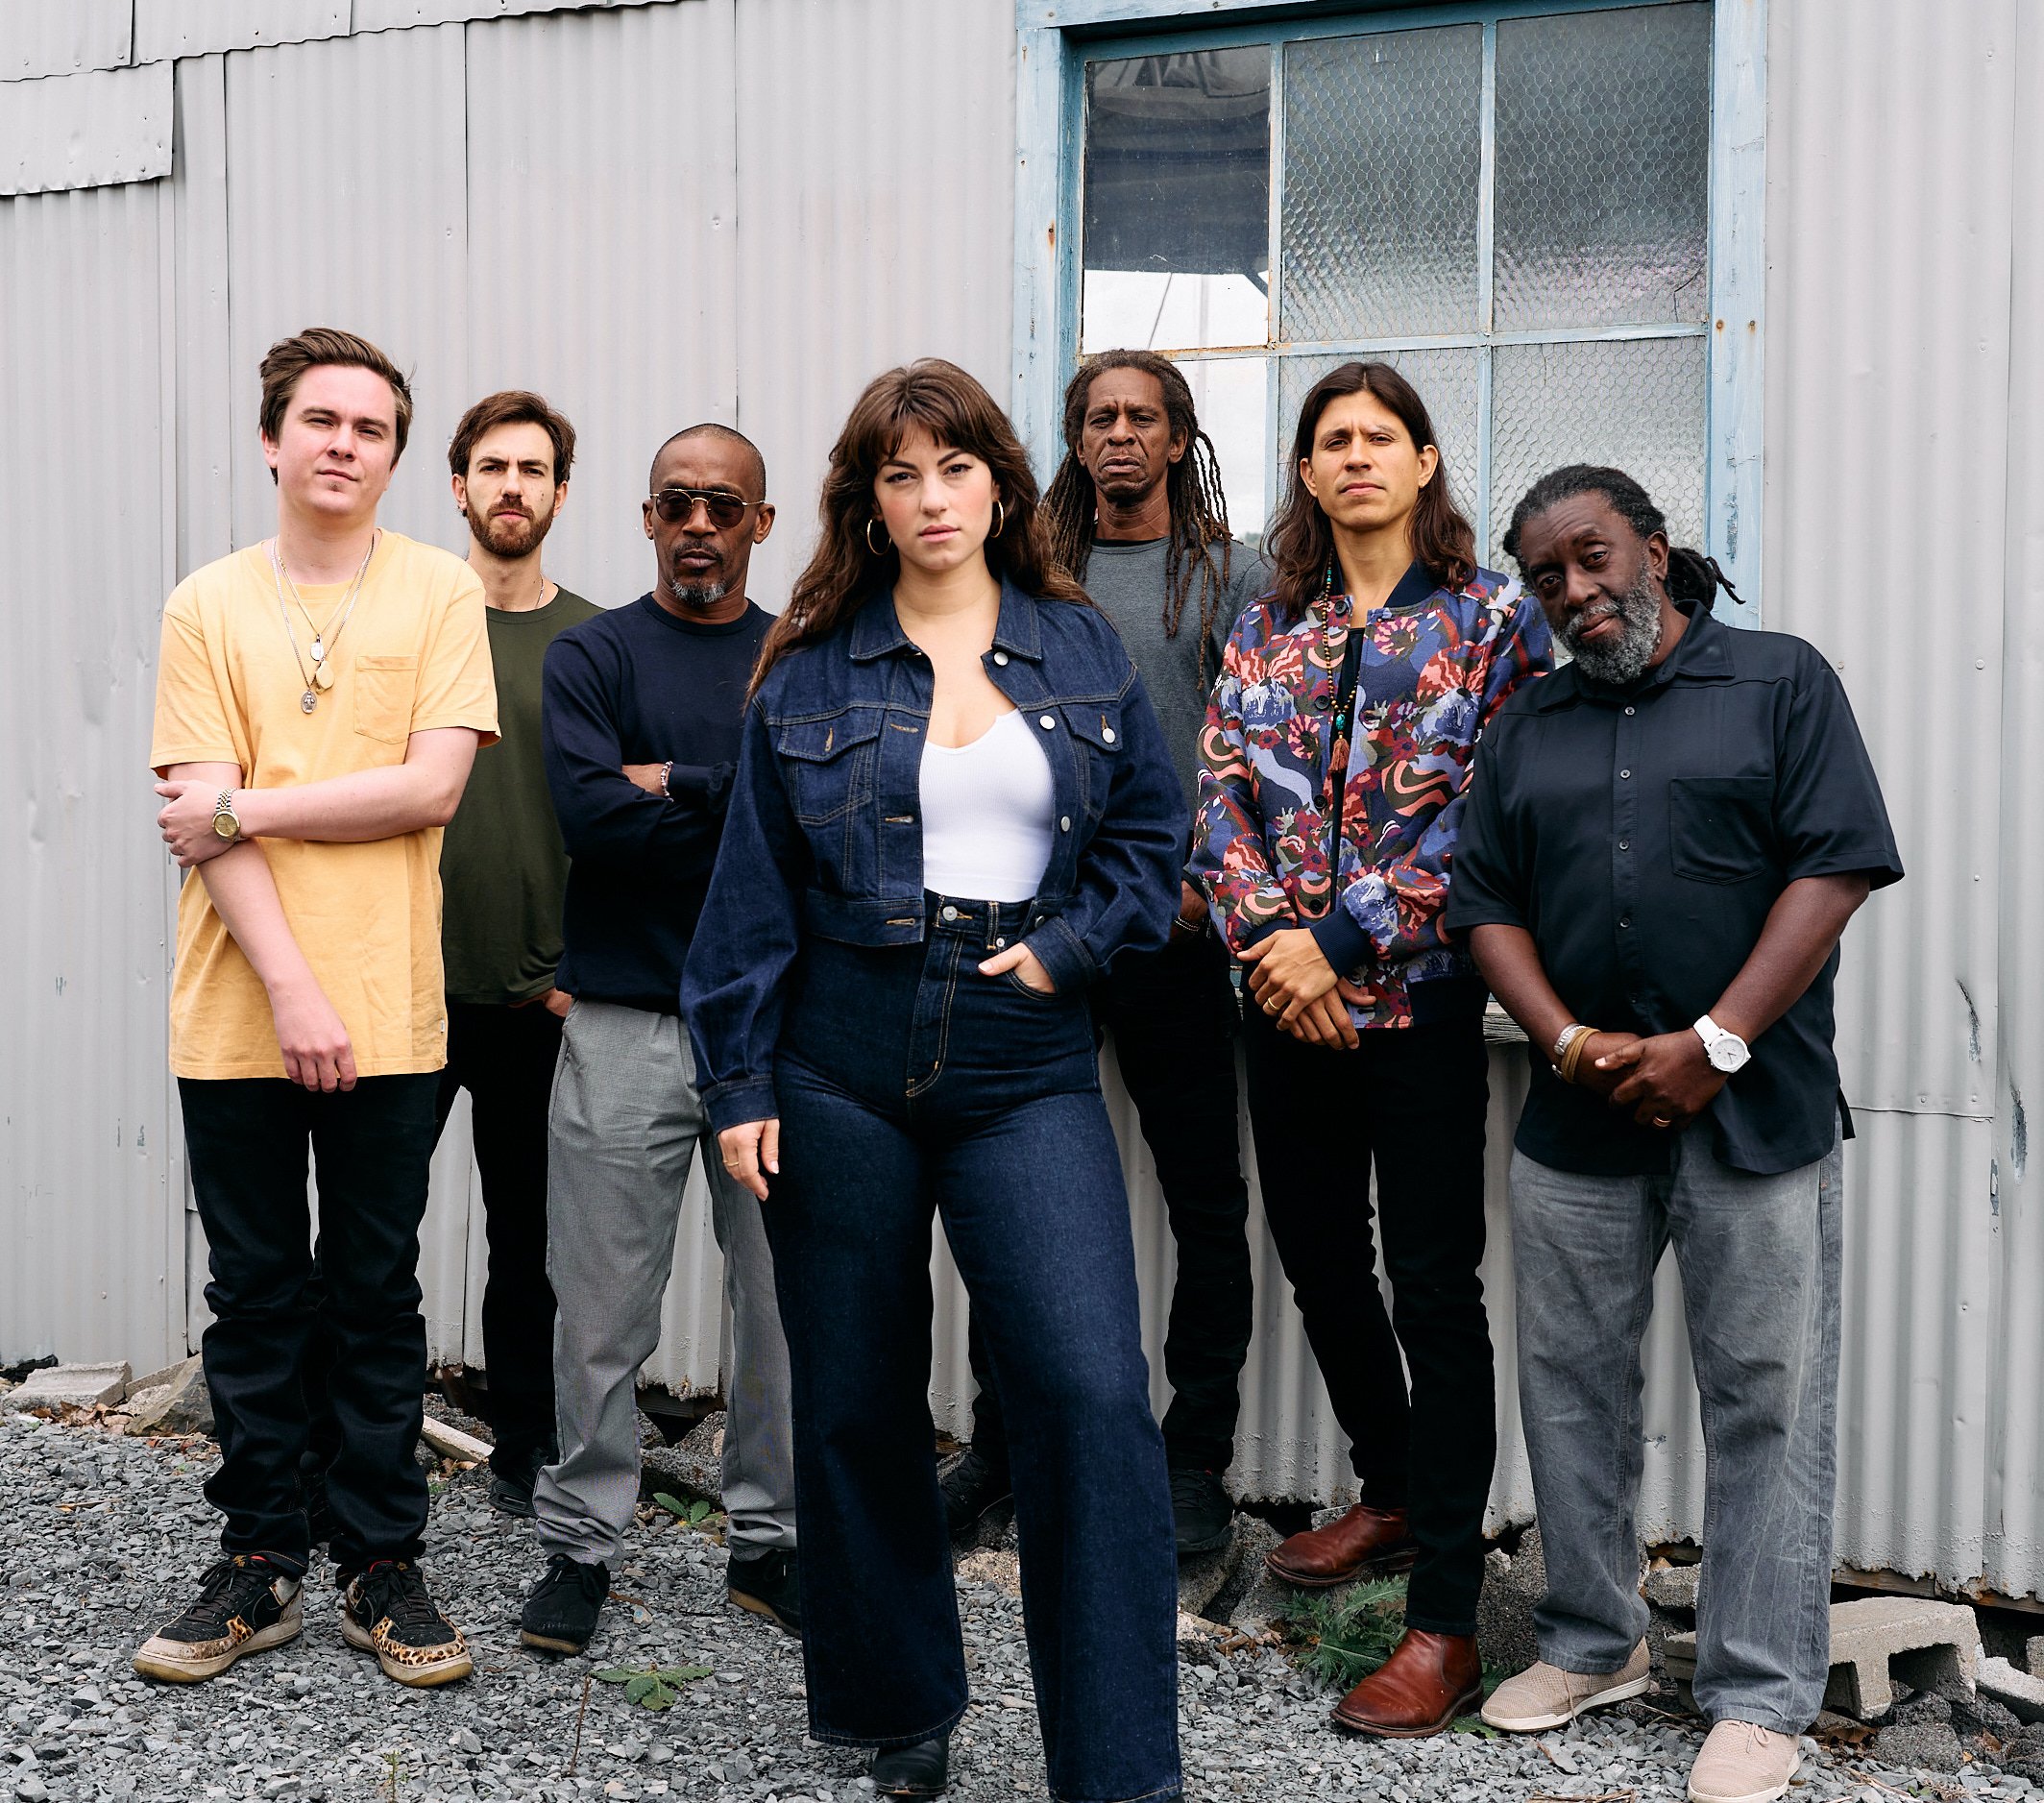 Seven members of the band 'SunDub' stand in front of a corrugated metal wall with a window. The central figure is a woman in a denim jacket and jeans, with long brown hair and hoop earrings. The men around her are dressed in a variety of casual and semi-formal outfits, including a yellow T-shirt, a patterned jacket, and dark sunglasses. The group's serious expressions add to the strong, cohesive vibe of the photo.